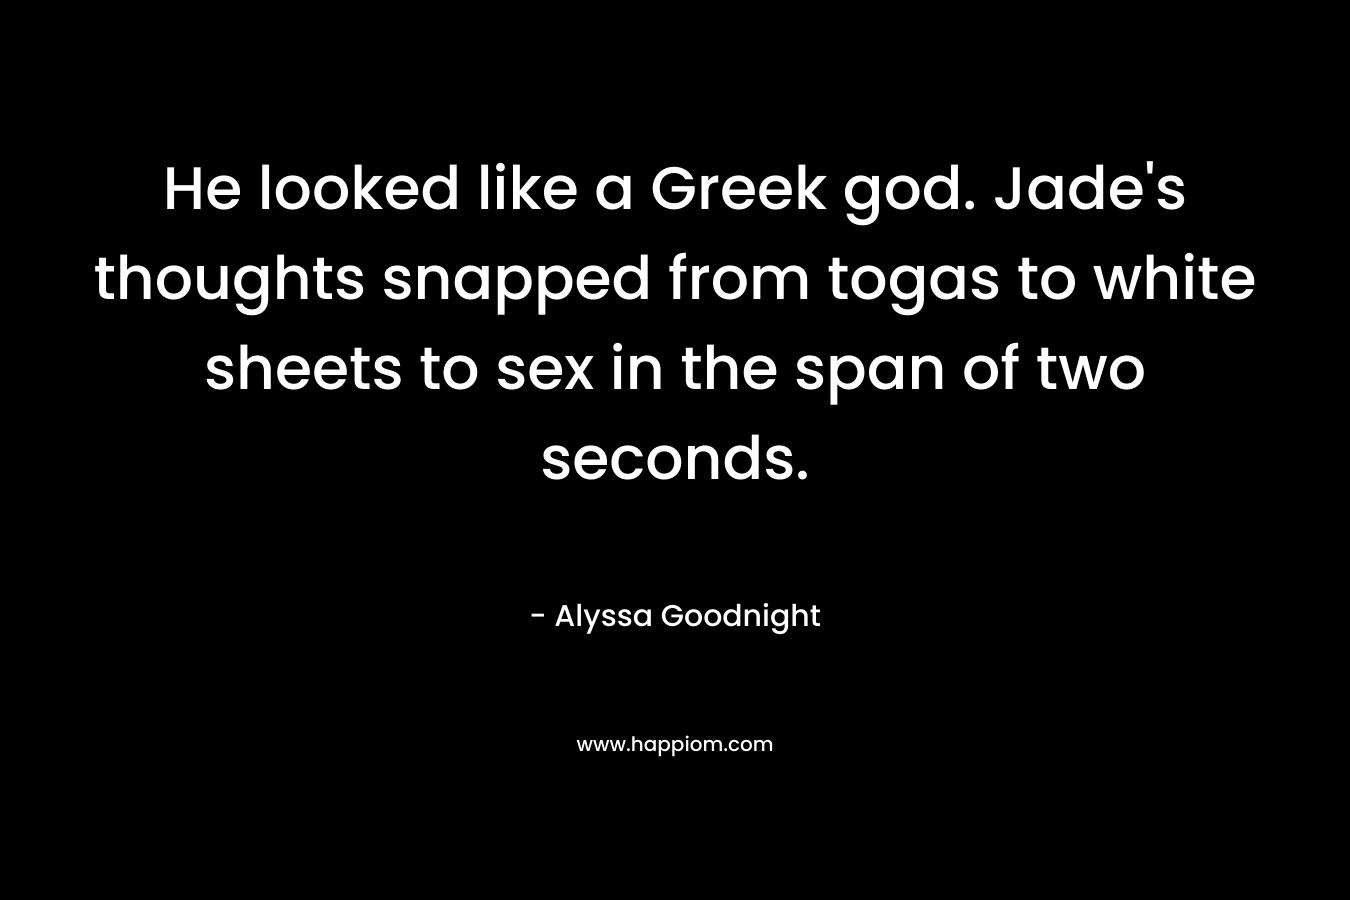 He looked like a Greek god. Jade’s thoughts snapped from togas to white sheets to sex in the span of two seconds. – Alyssa Goodnight